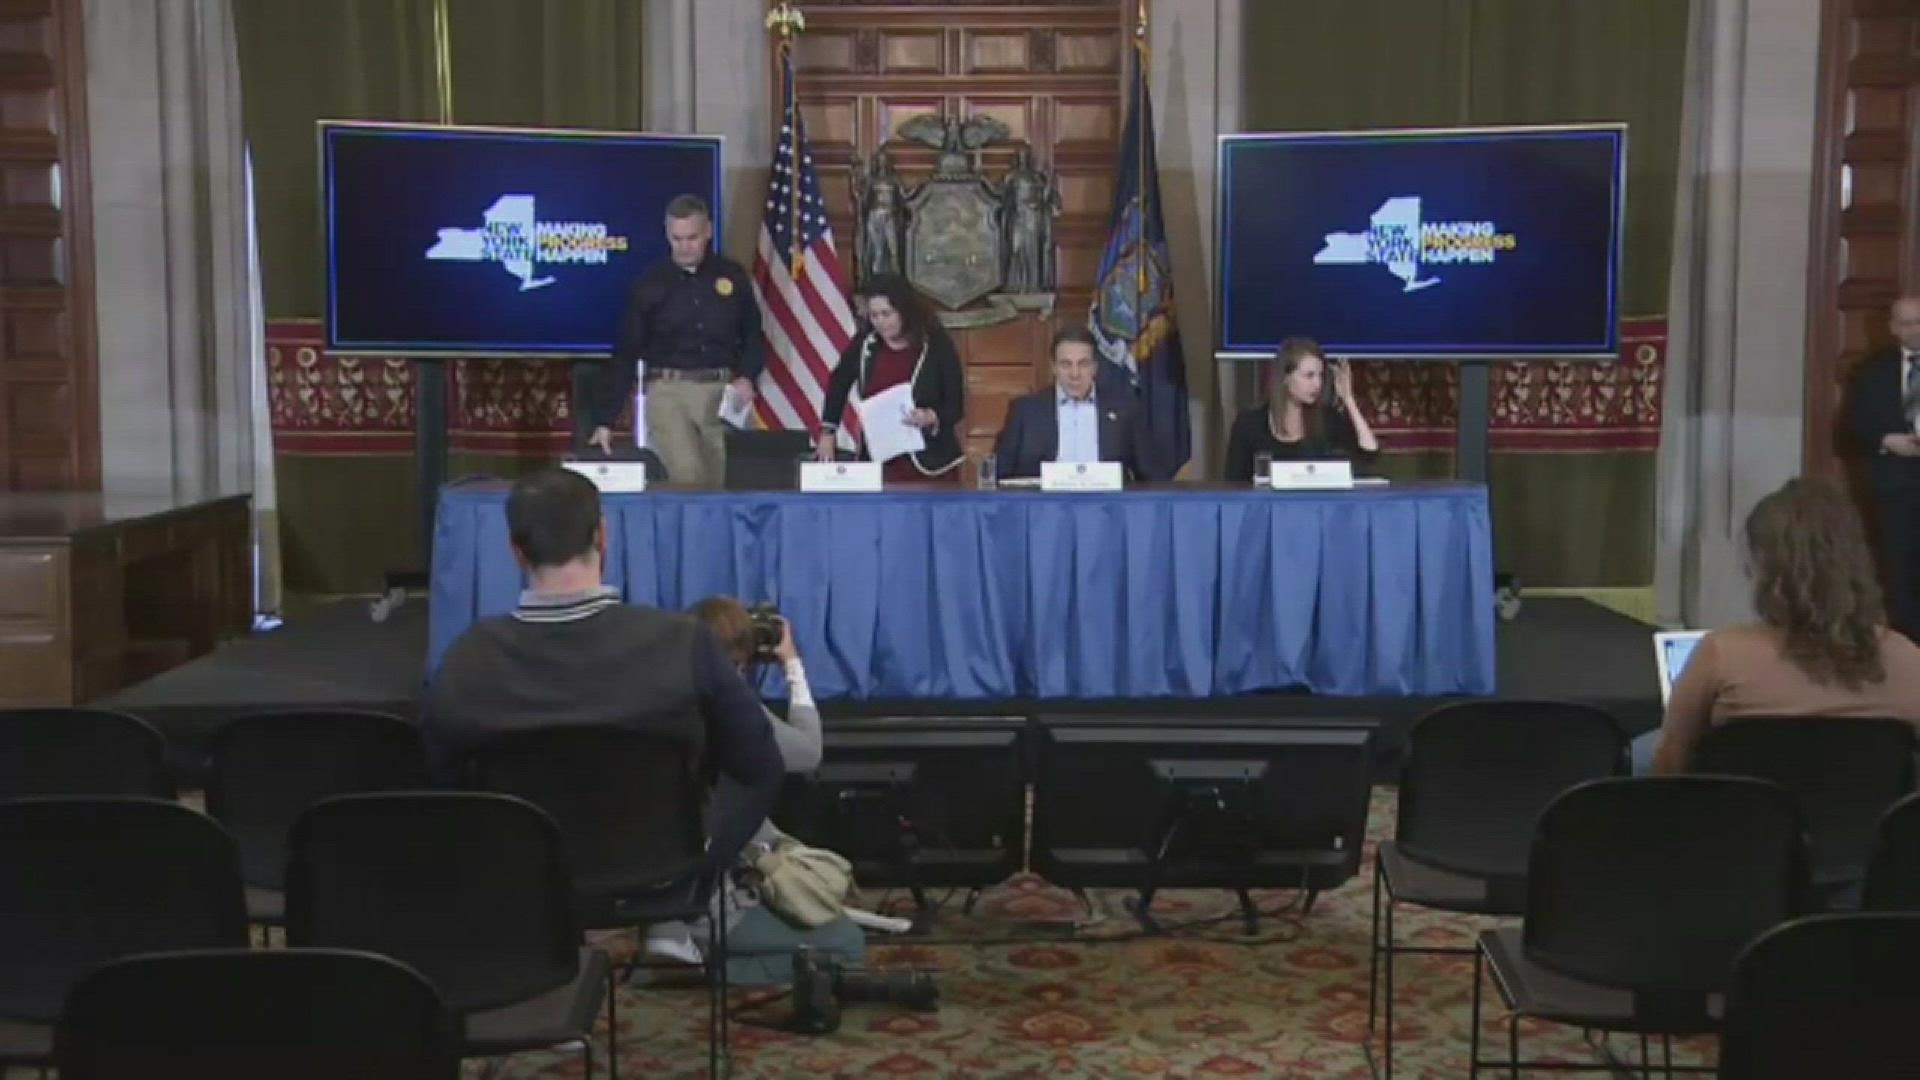 Governor Andrew Cuomo declared a state of emergency Saturday amid the coronavirus update.